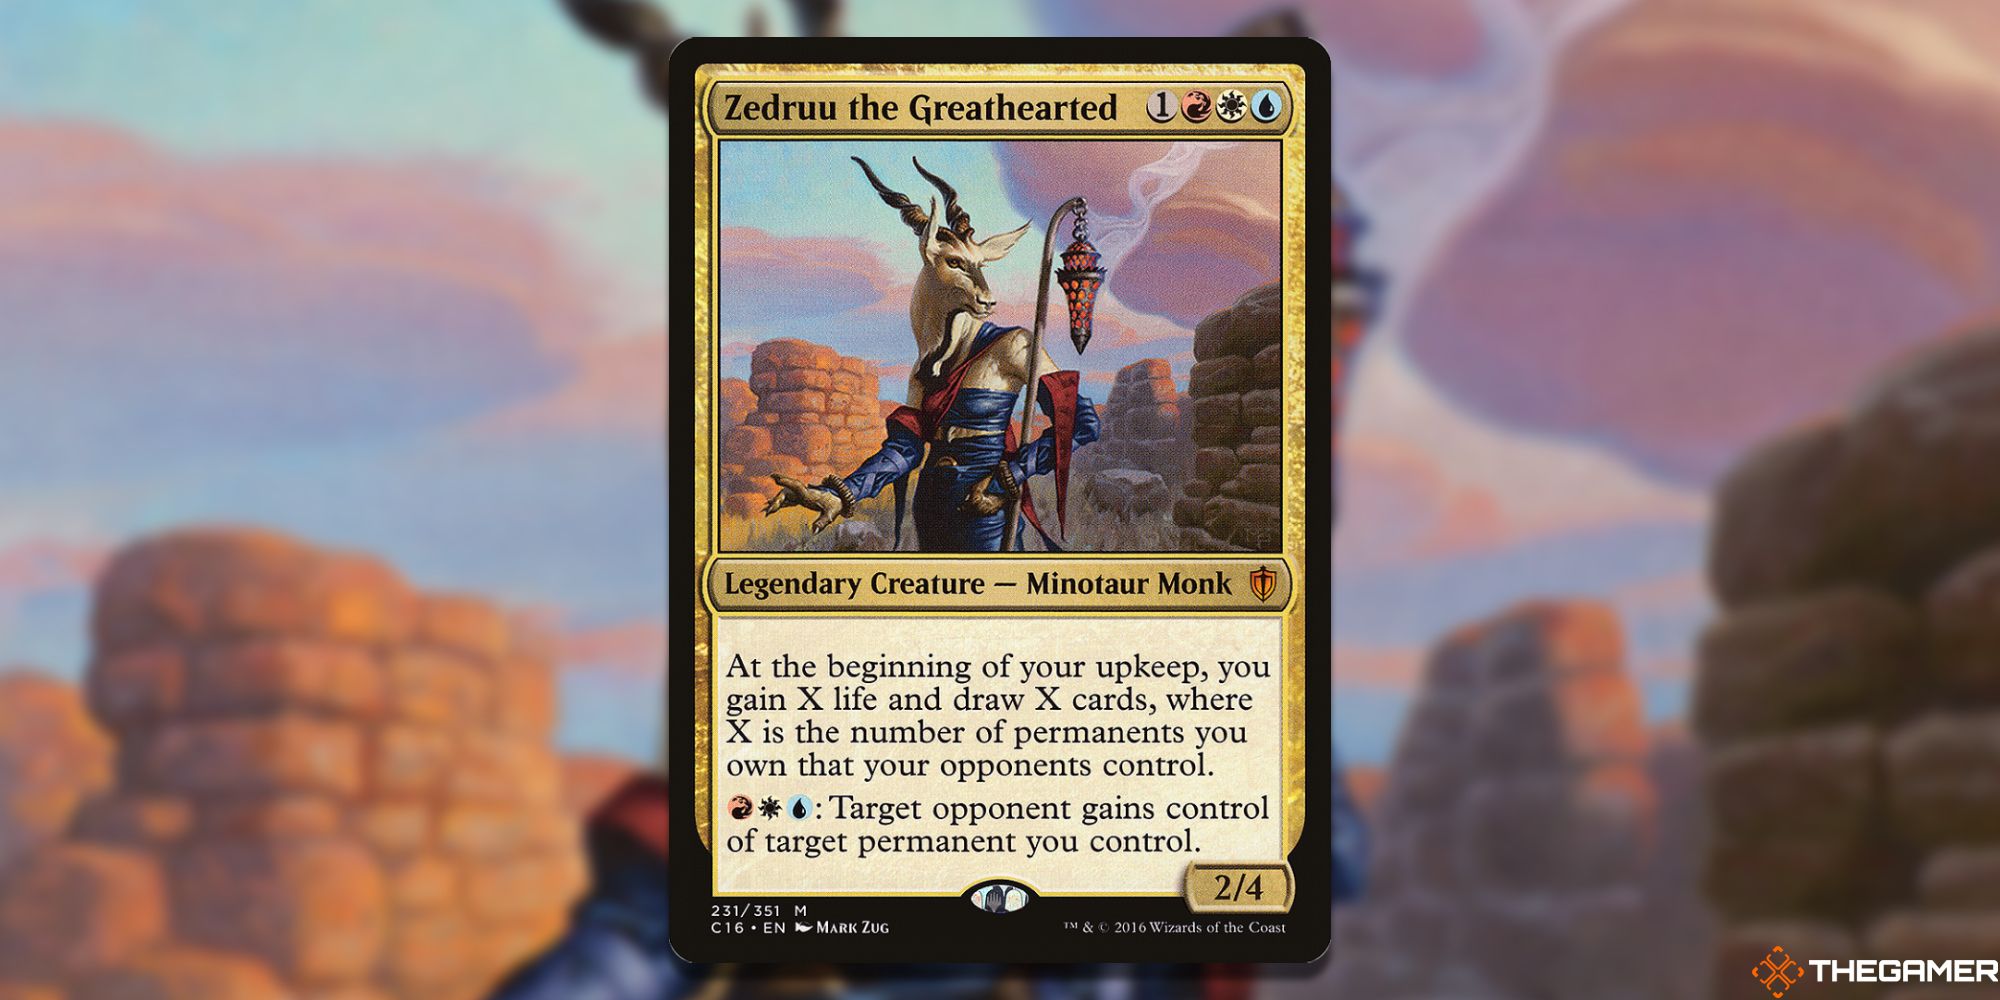 Image of the Zedruu the Greathearted card in Magic: The Gathering, with art by Mark Zug